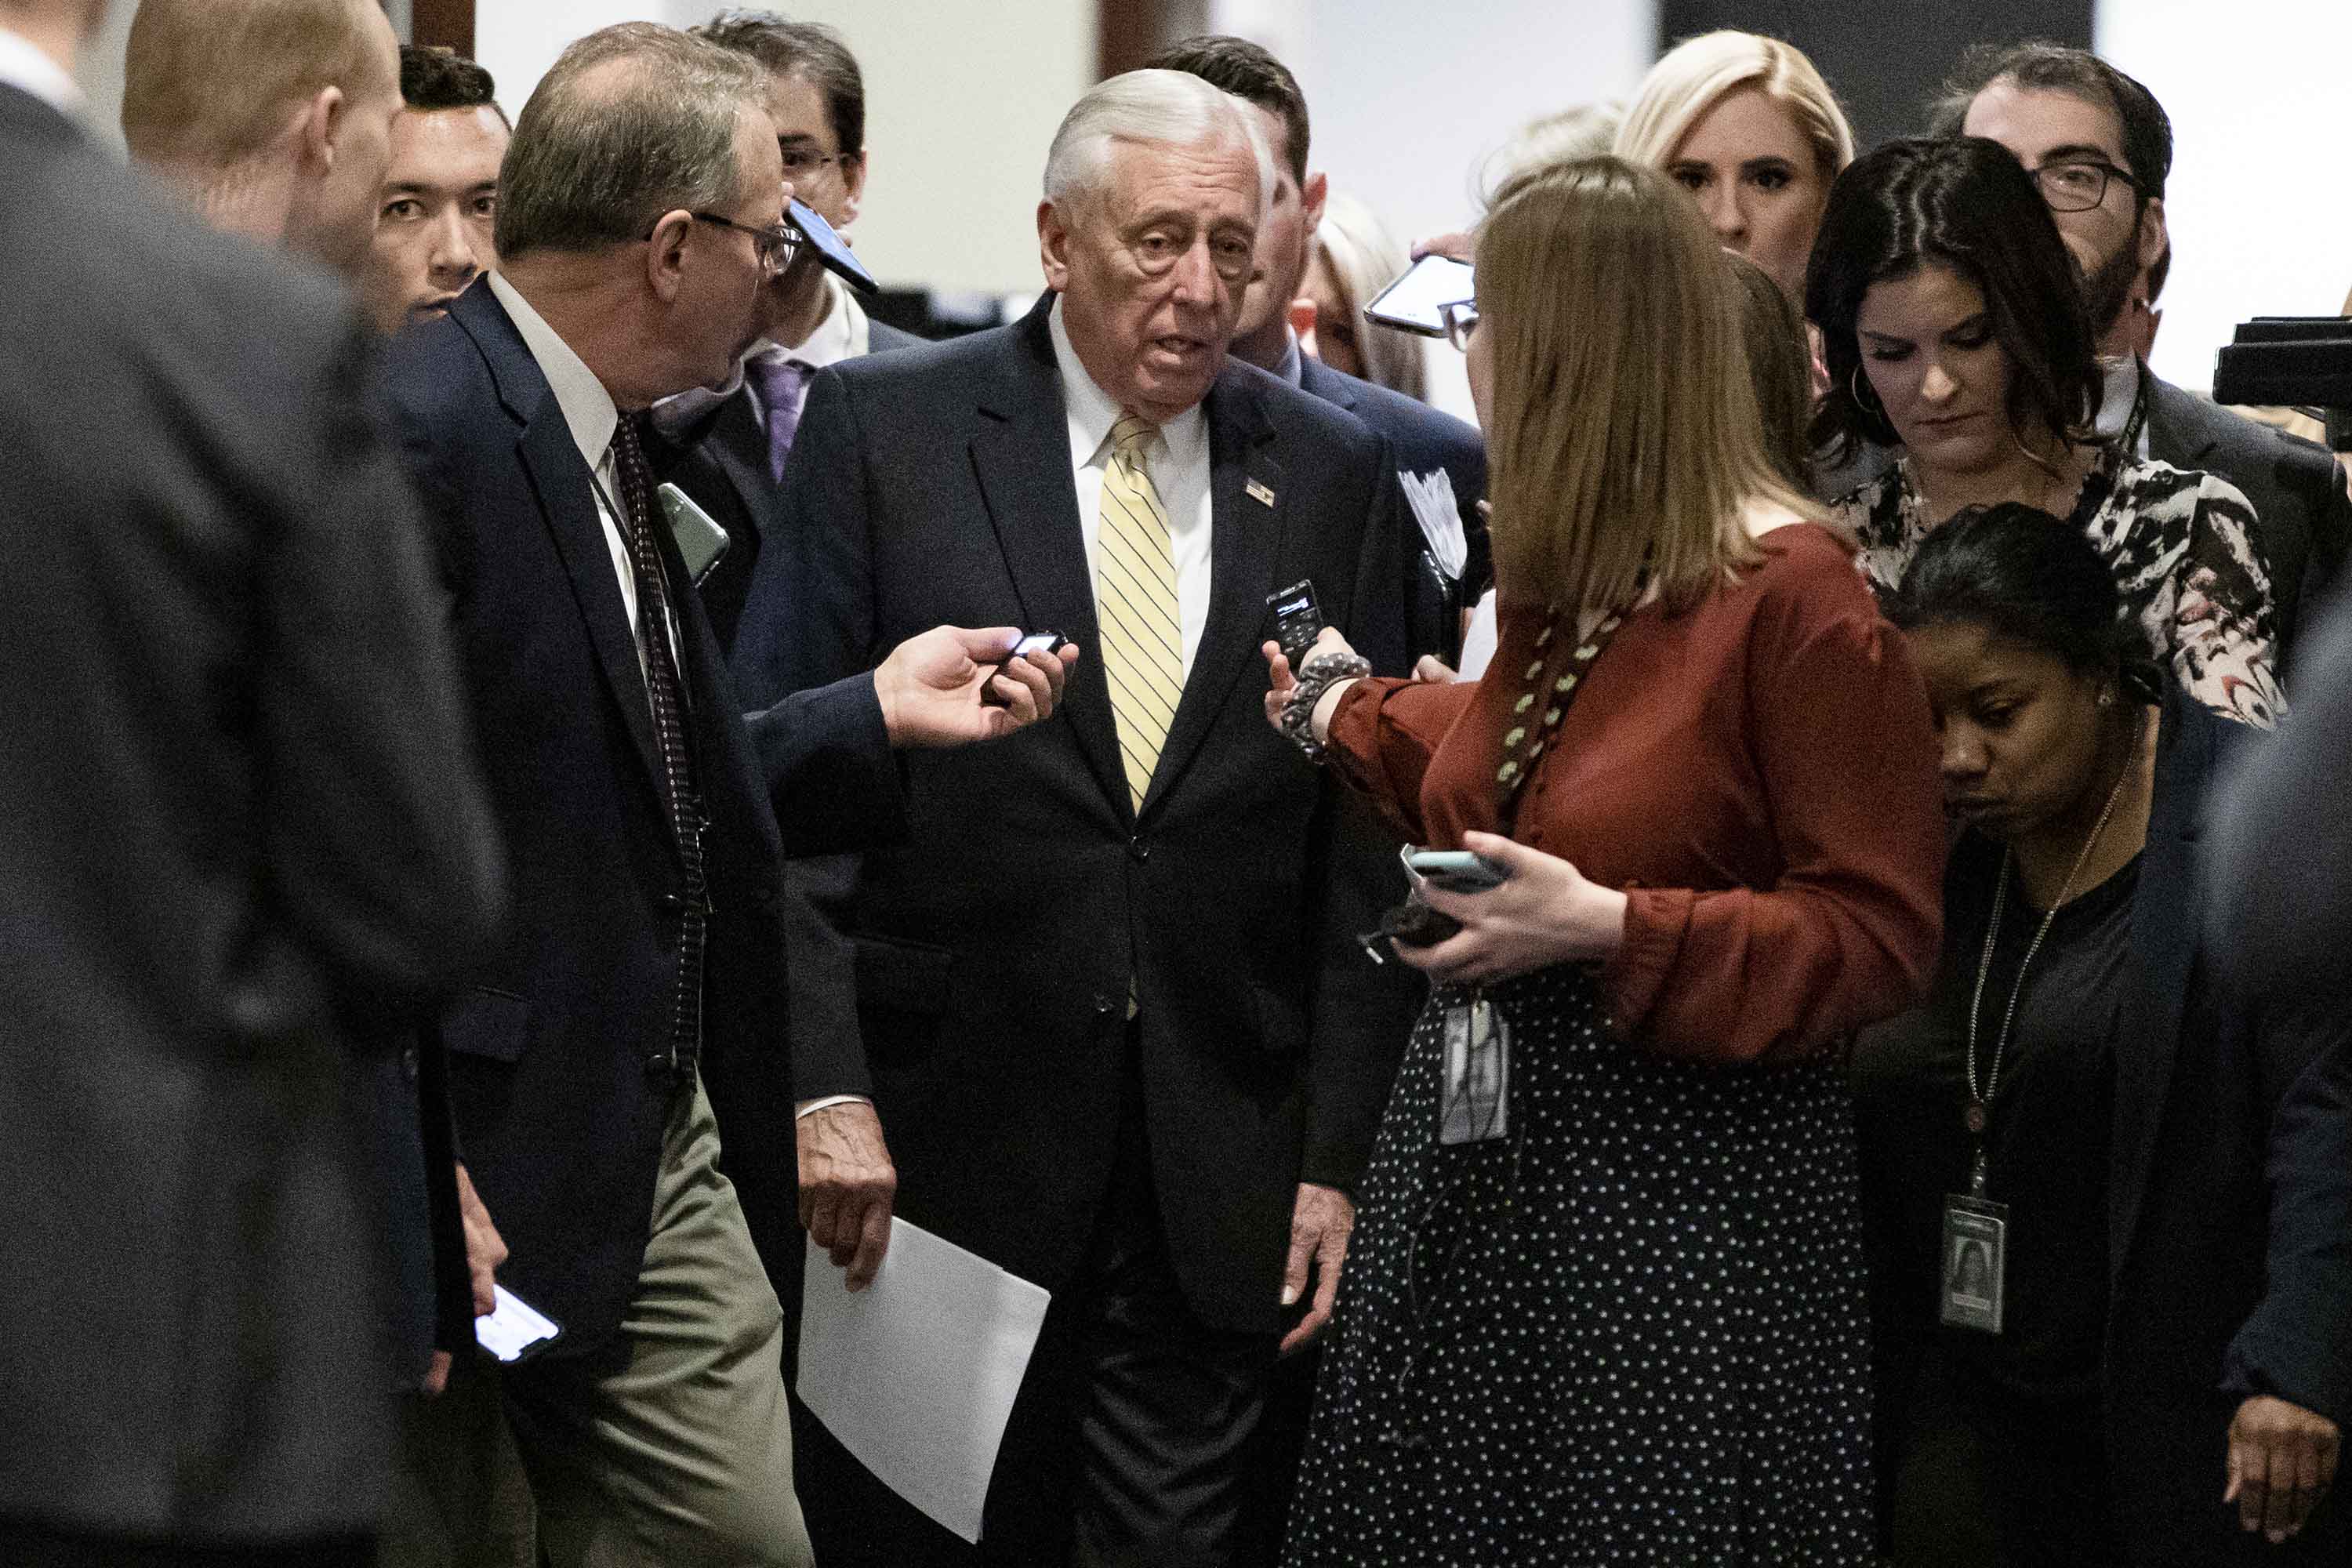 US House Majority Leader Steny Hoyer heads to a closed-door briefing on recent developments with the novel coronavirus on March 4, in Washington, DC.